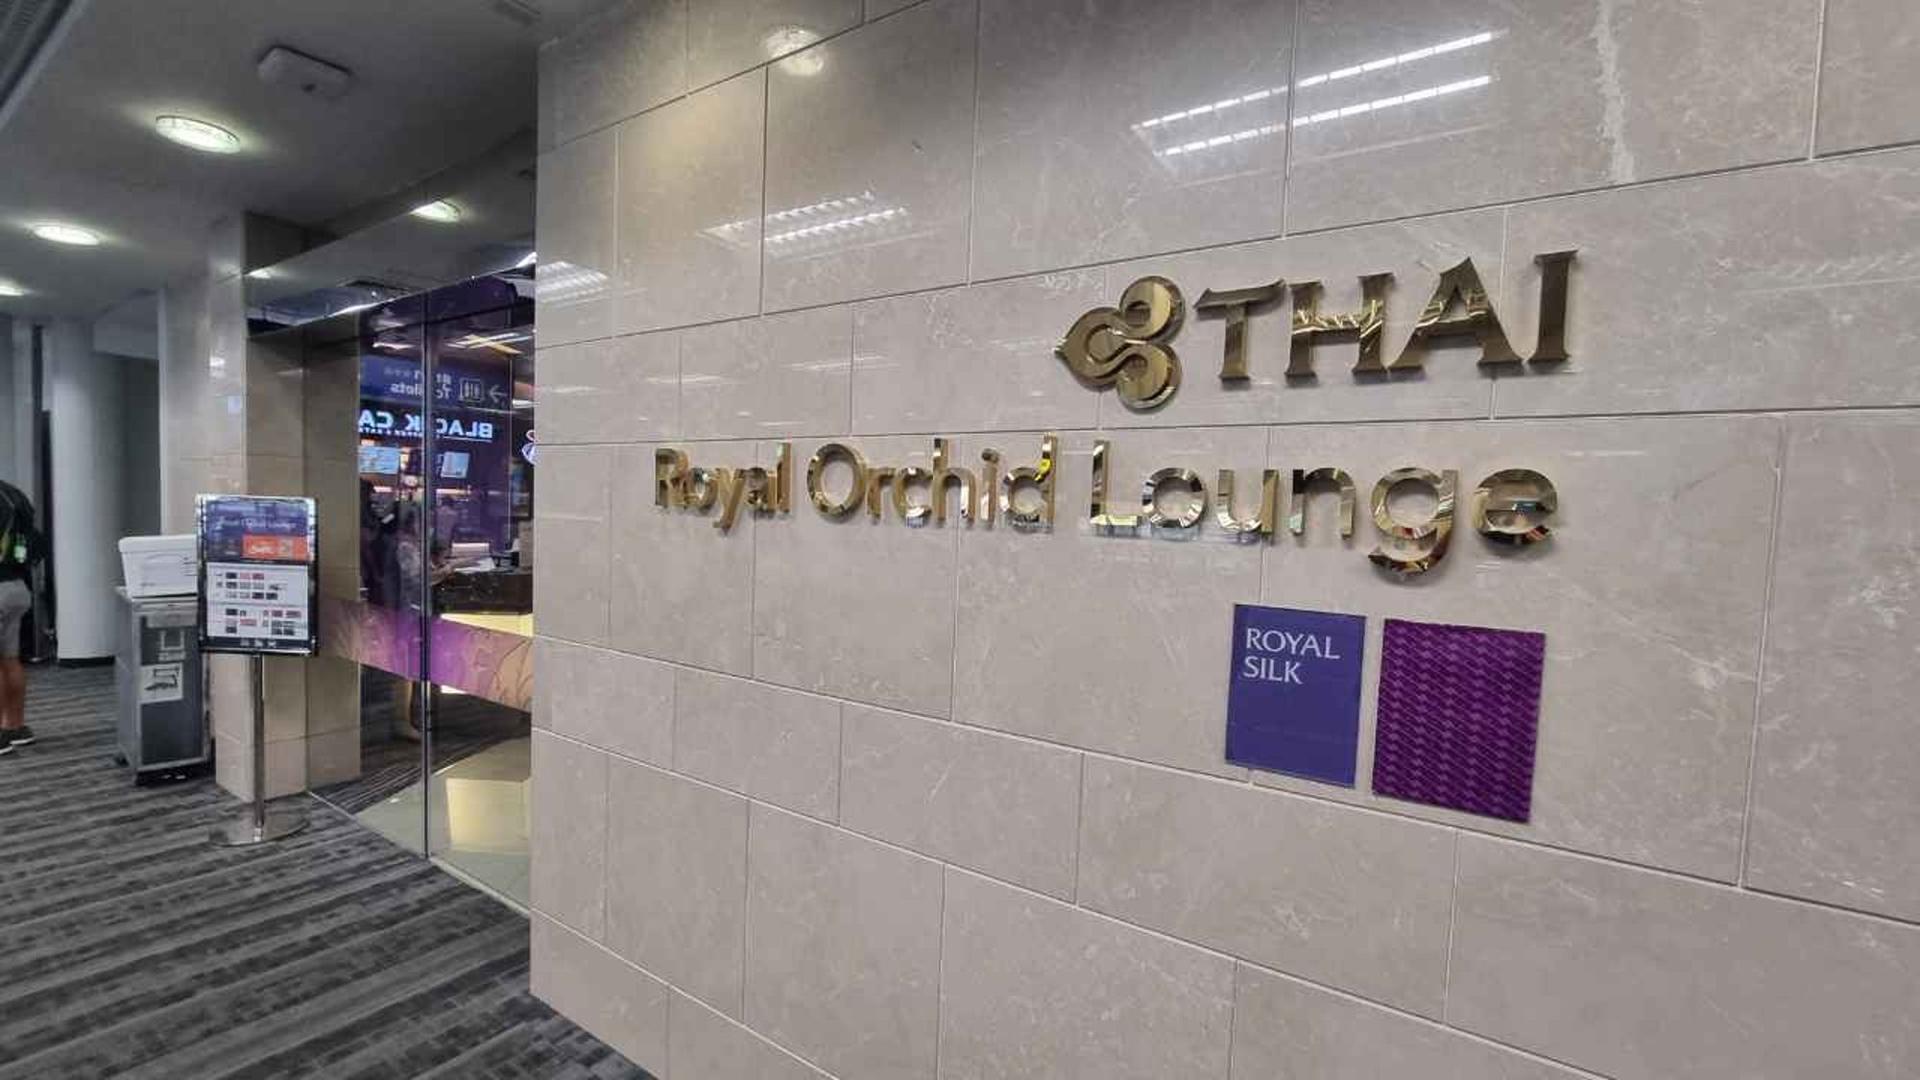 Thai Airways Royal Orchid Lounge image 4 of 22